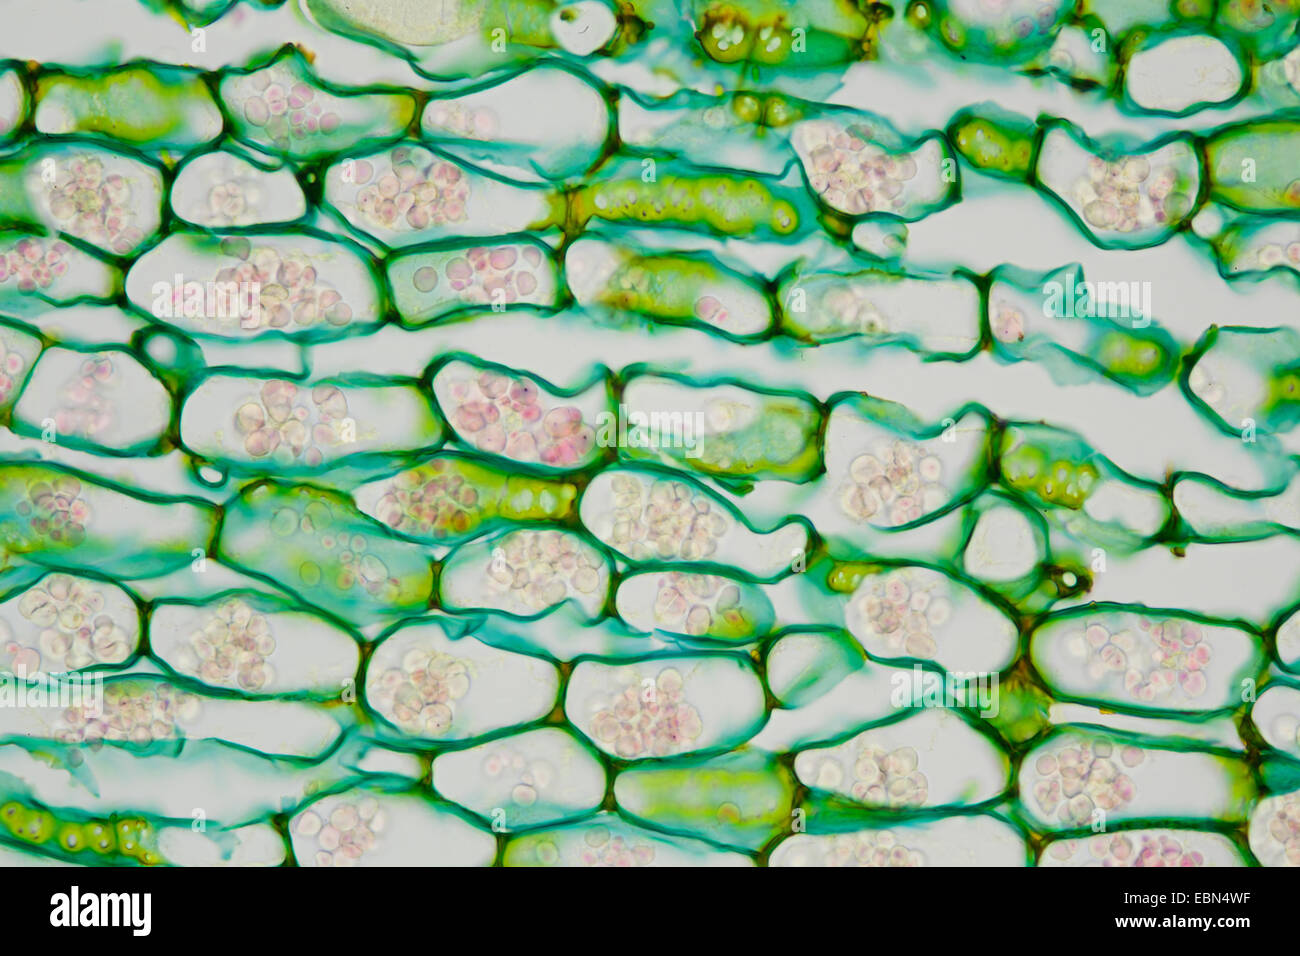 horse-radish (Armoracia rusticana), microscopical cut of a root with starch grains Stock Photo